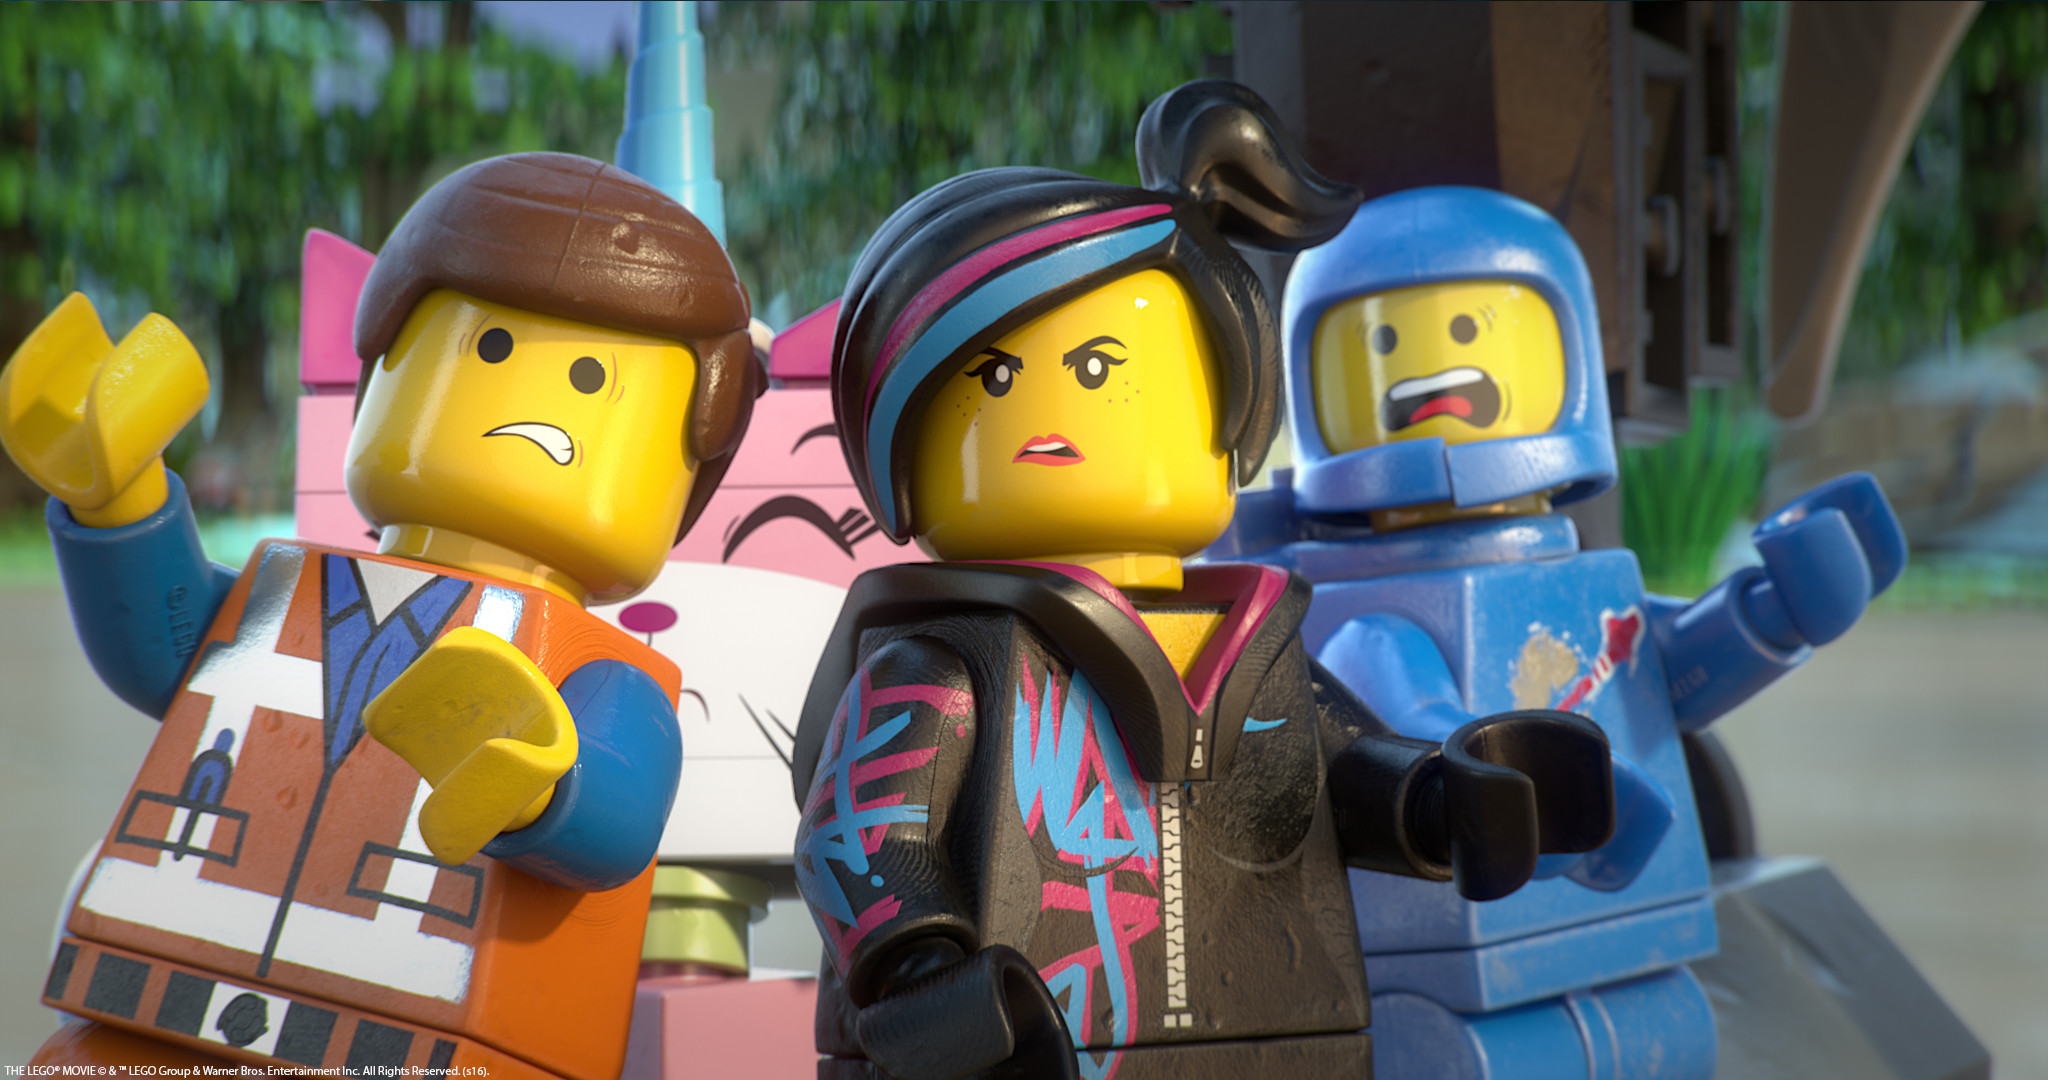 Download The Lego Movie wallpapers for mobile phone free The Lego Movie  HD pictures